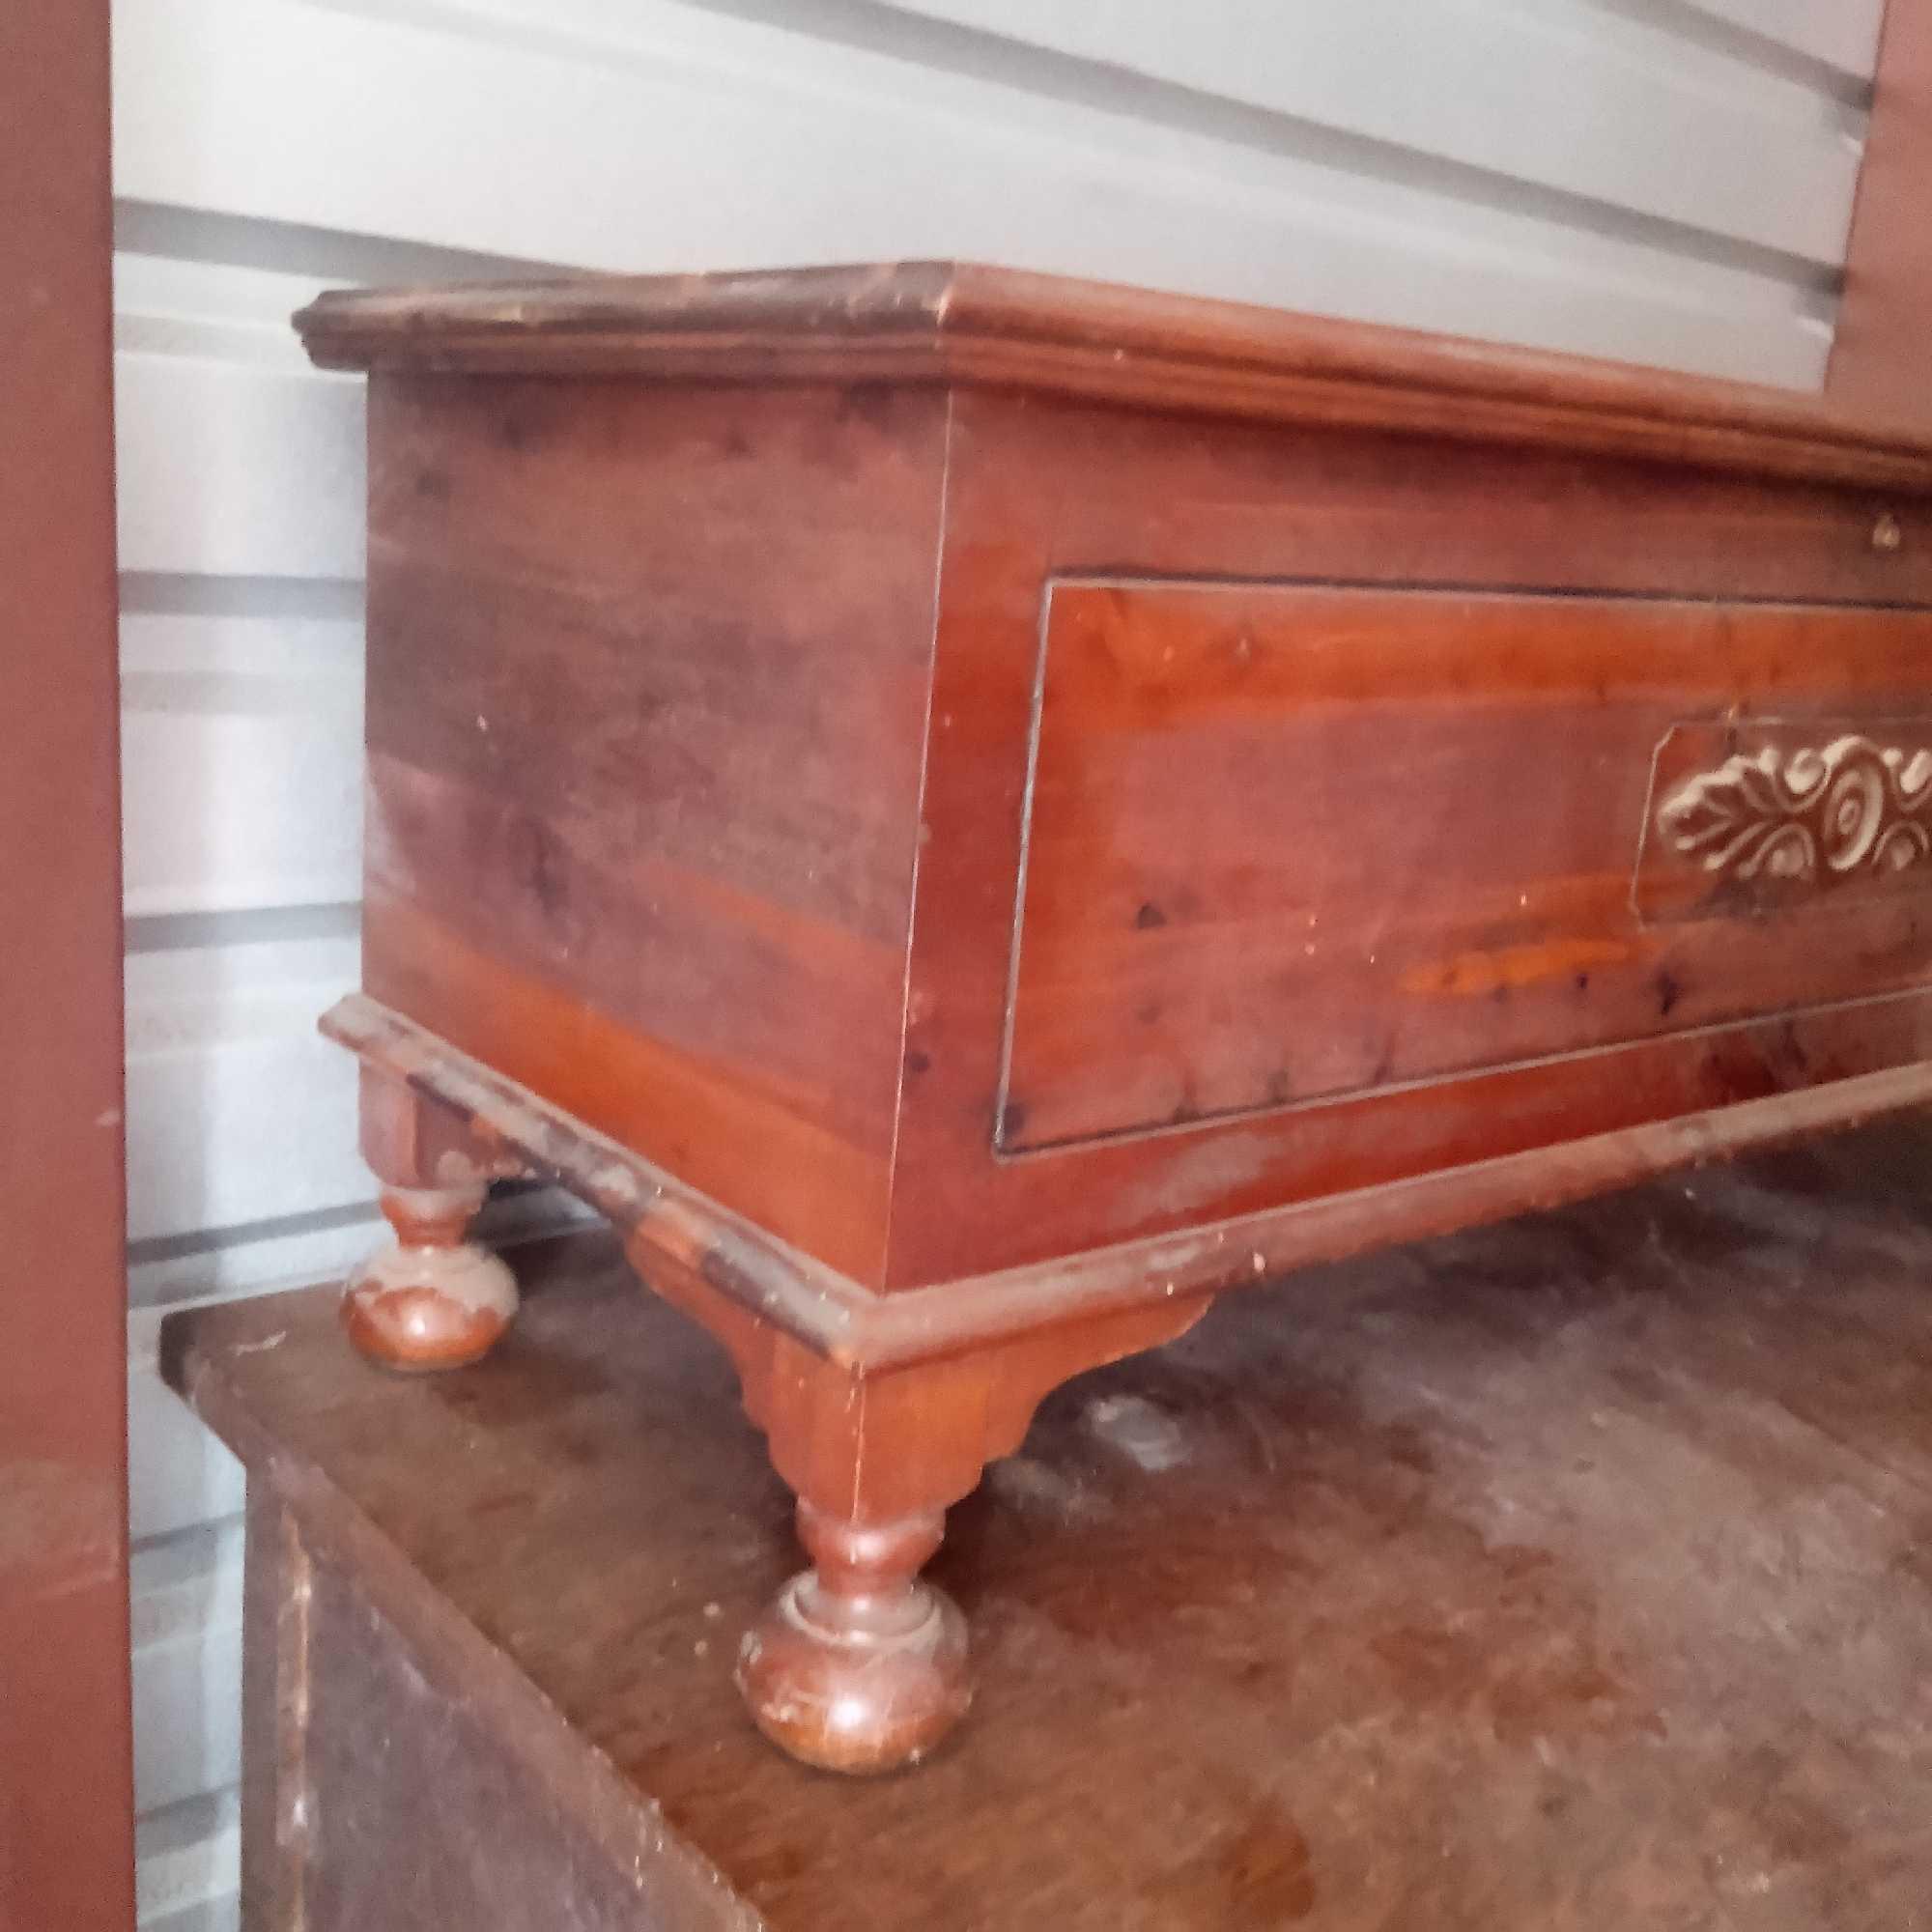 GORGEOUS CEDAR HOPE CHEST! SMELLS SO GOOD! WITH FEATHER EYE ACCENT